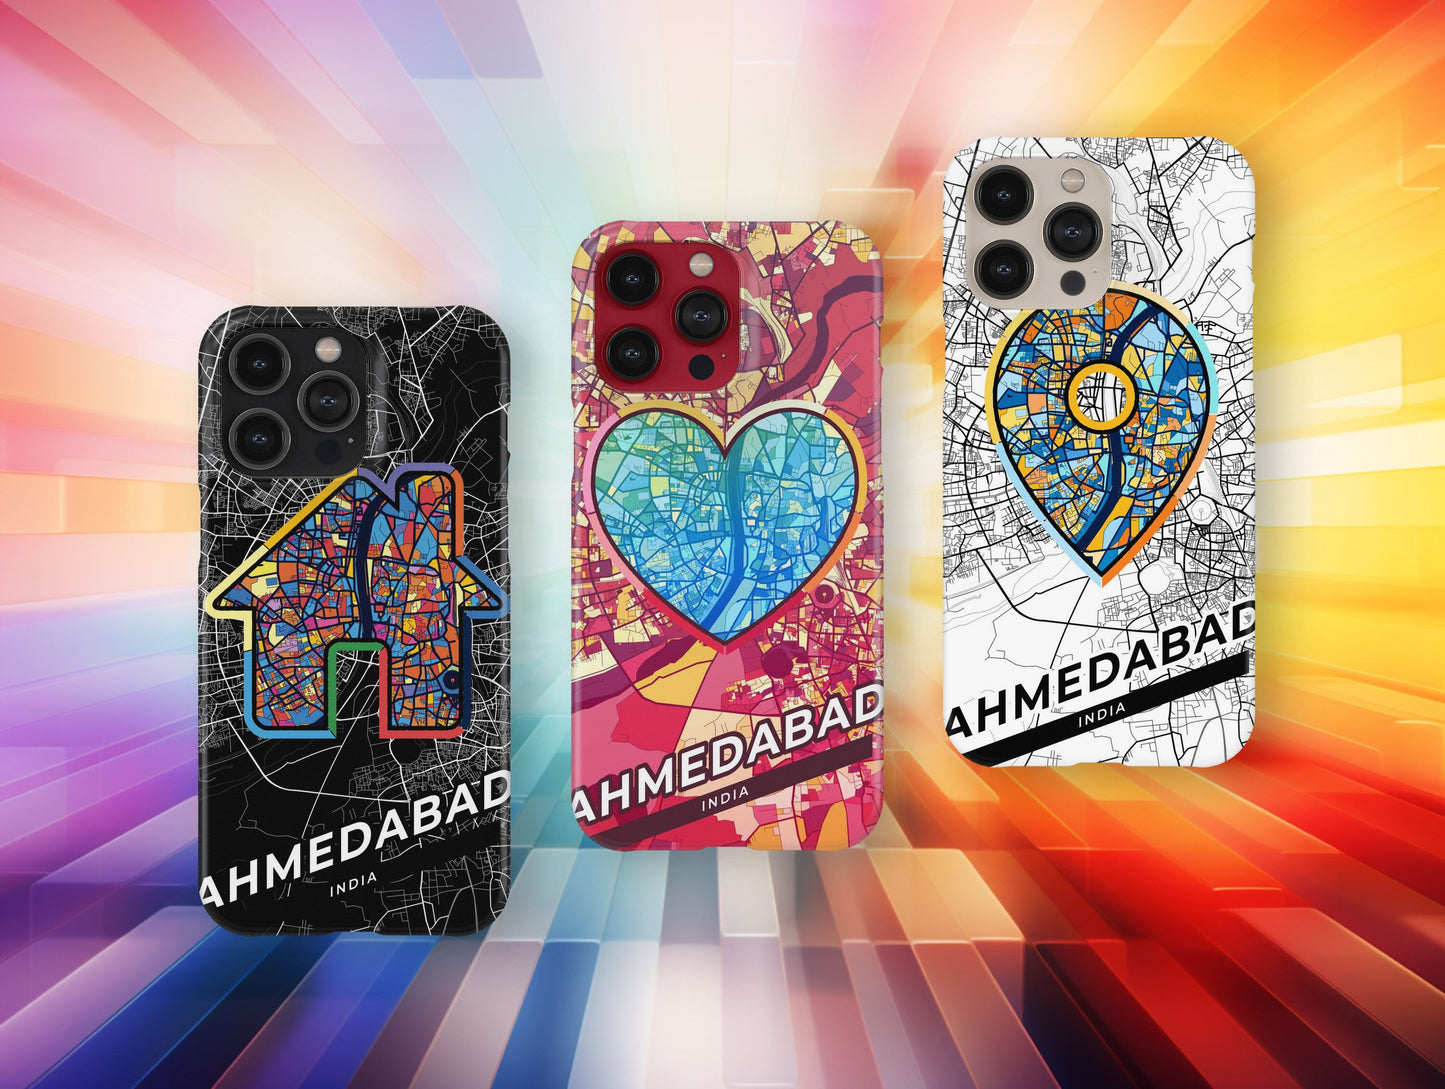 Ahmedabad India slim phone case with colorful icon. Birthday, wedding or housewarming gift. Couple match cases.